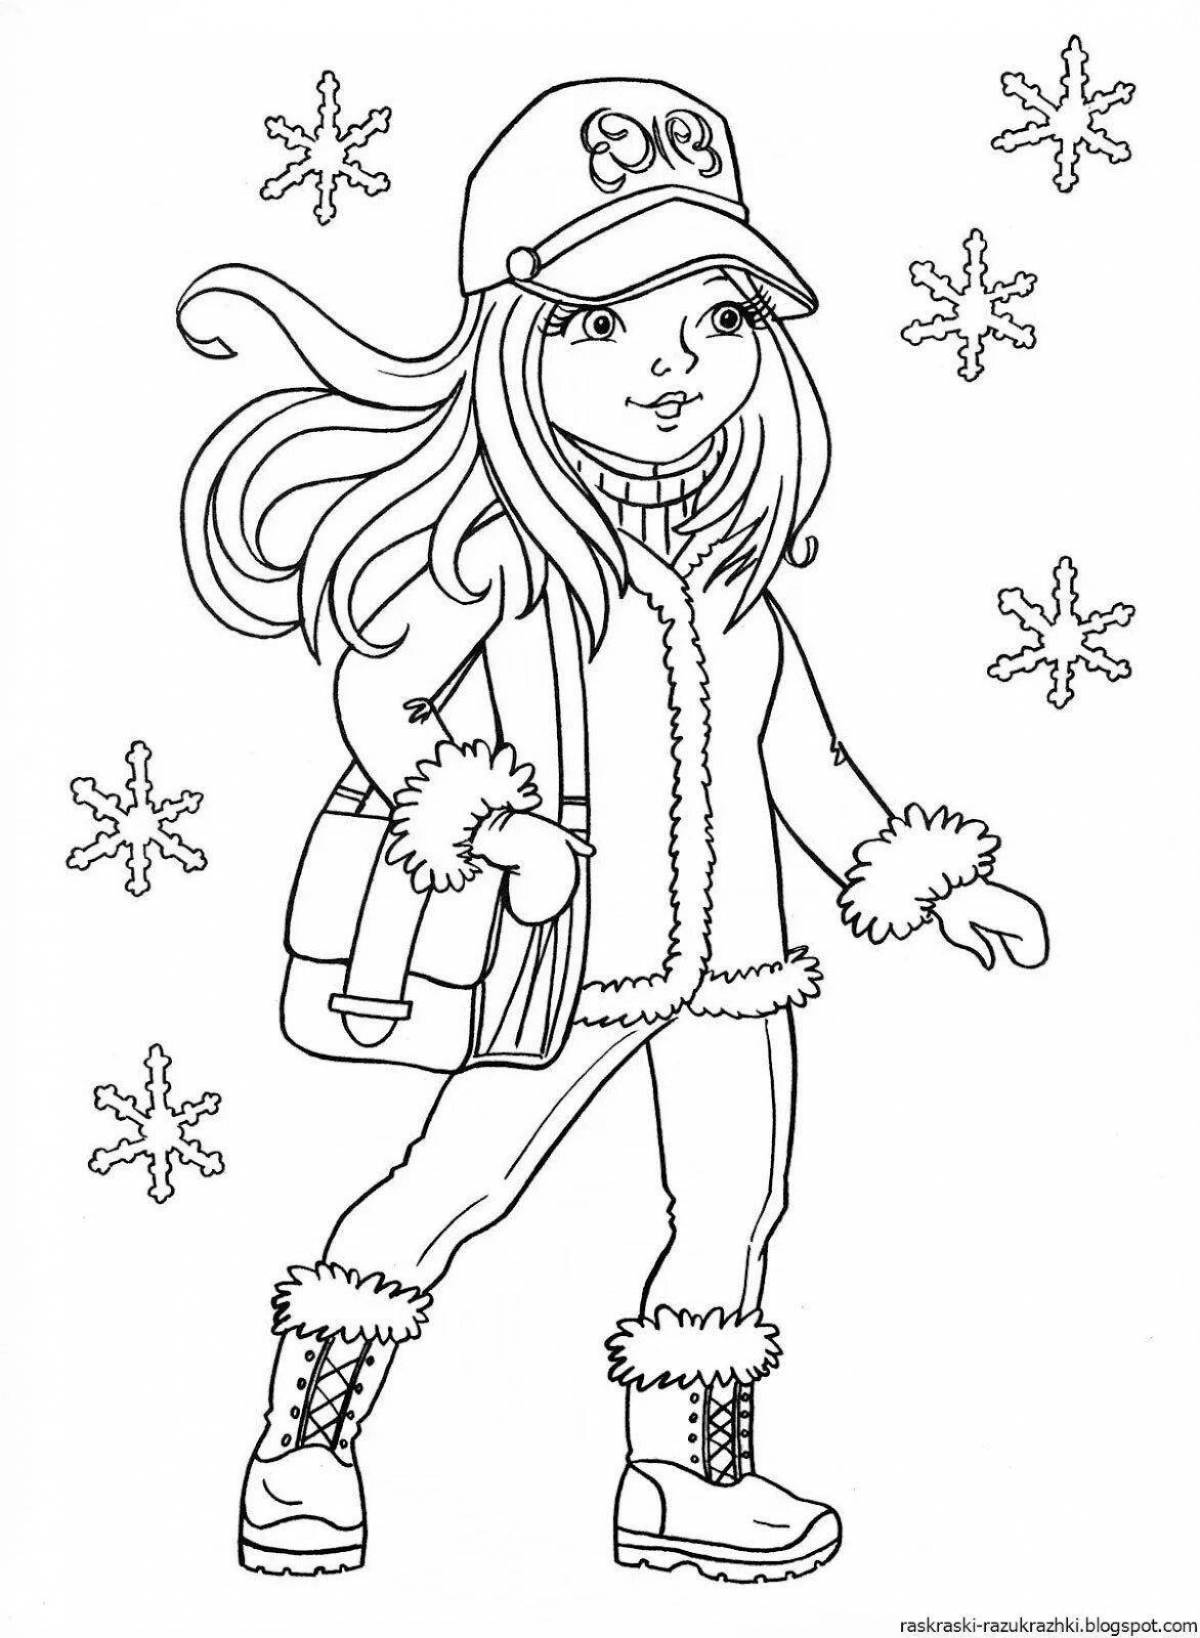 Charming coloring book for girls cool for 7 years